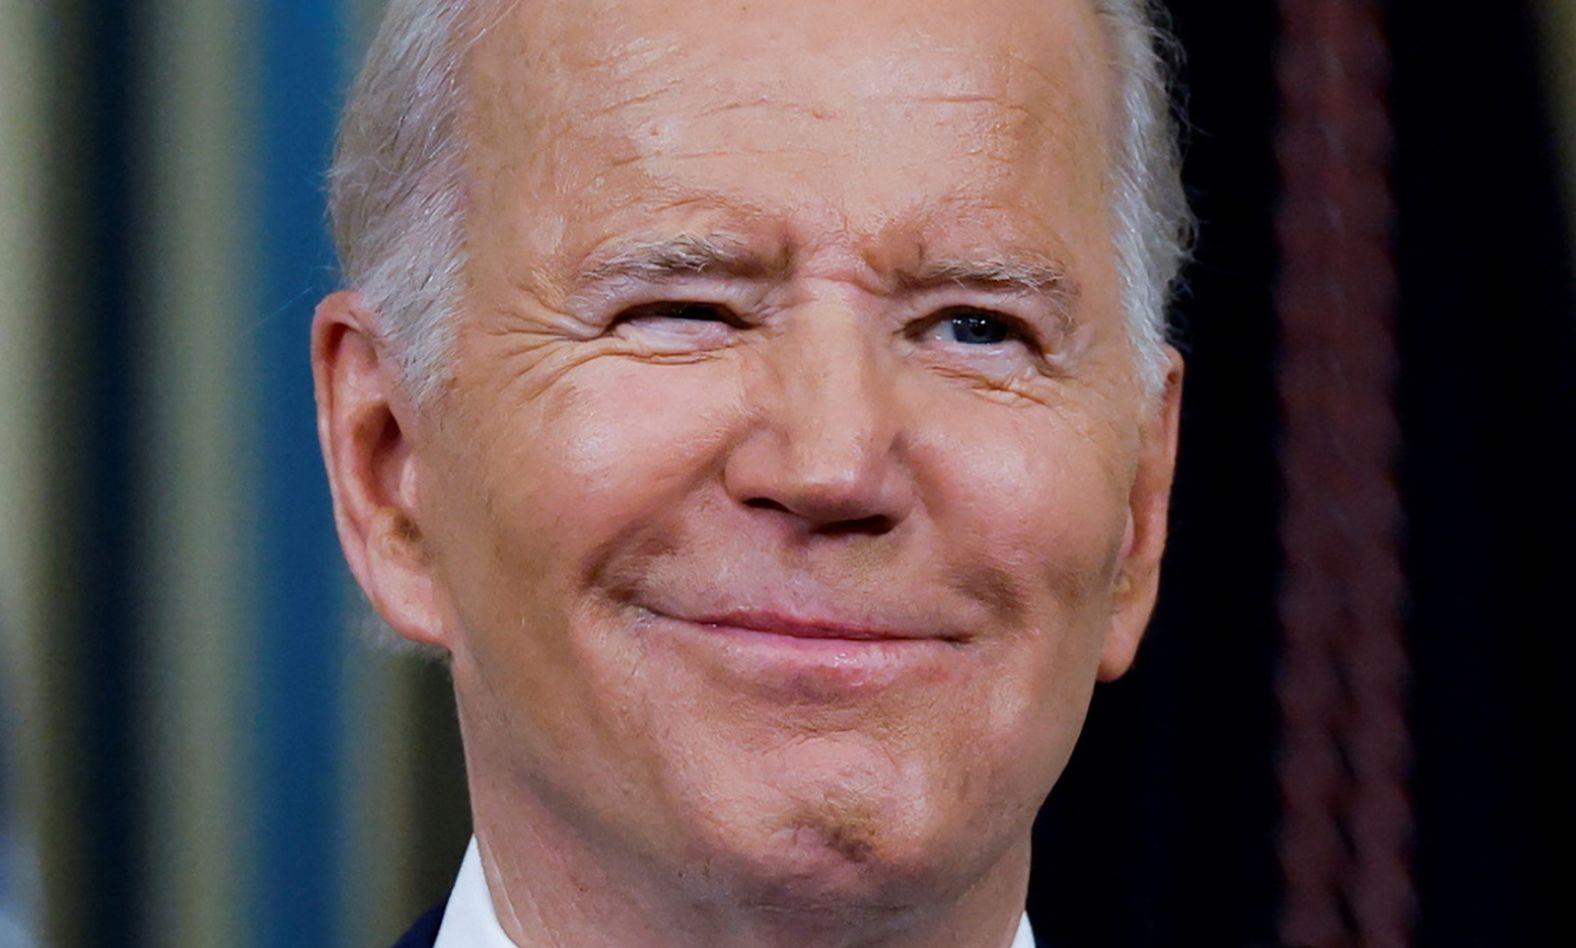 President Joe Biden speaks to the media during a <a href="index.php?page=&url=https%3A%2F%2Fwww.cnn.com%2F2022%2F11%2F09%2Fpolitics%2Fbiden-news-conference-midterms" target="_blank">news conference at the White House.</a> "We had an election yesterday," Biden said on November 9. "And it was a good day, I think, for democracy." He said that "while the press and the pundits are predicting a giant red wave, it didn't happen."